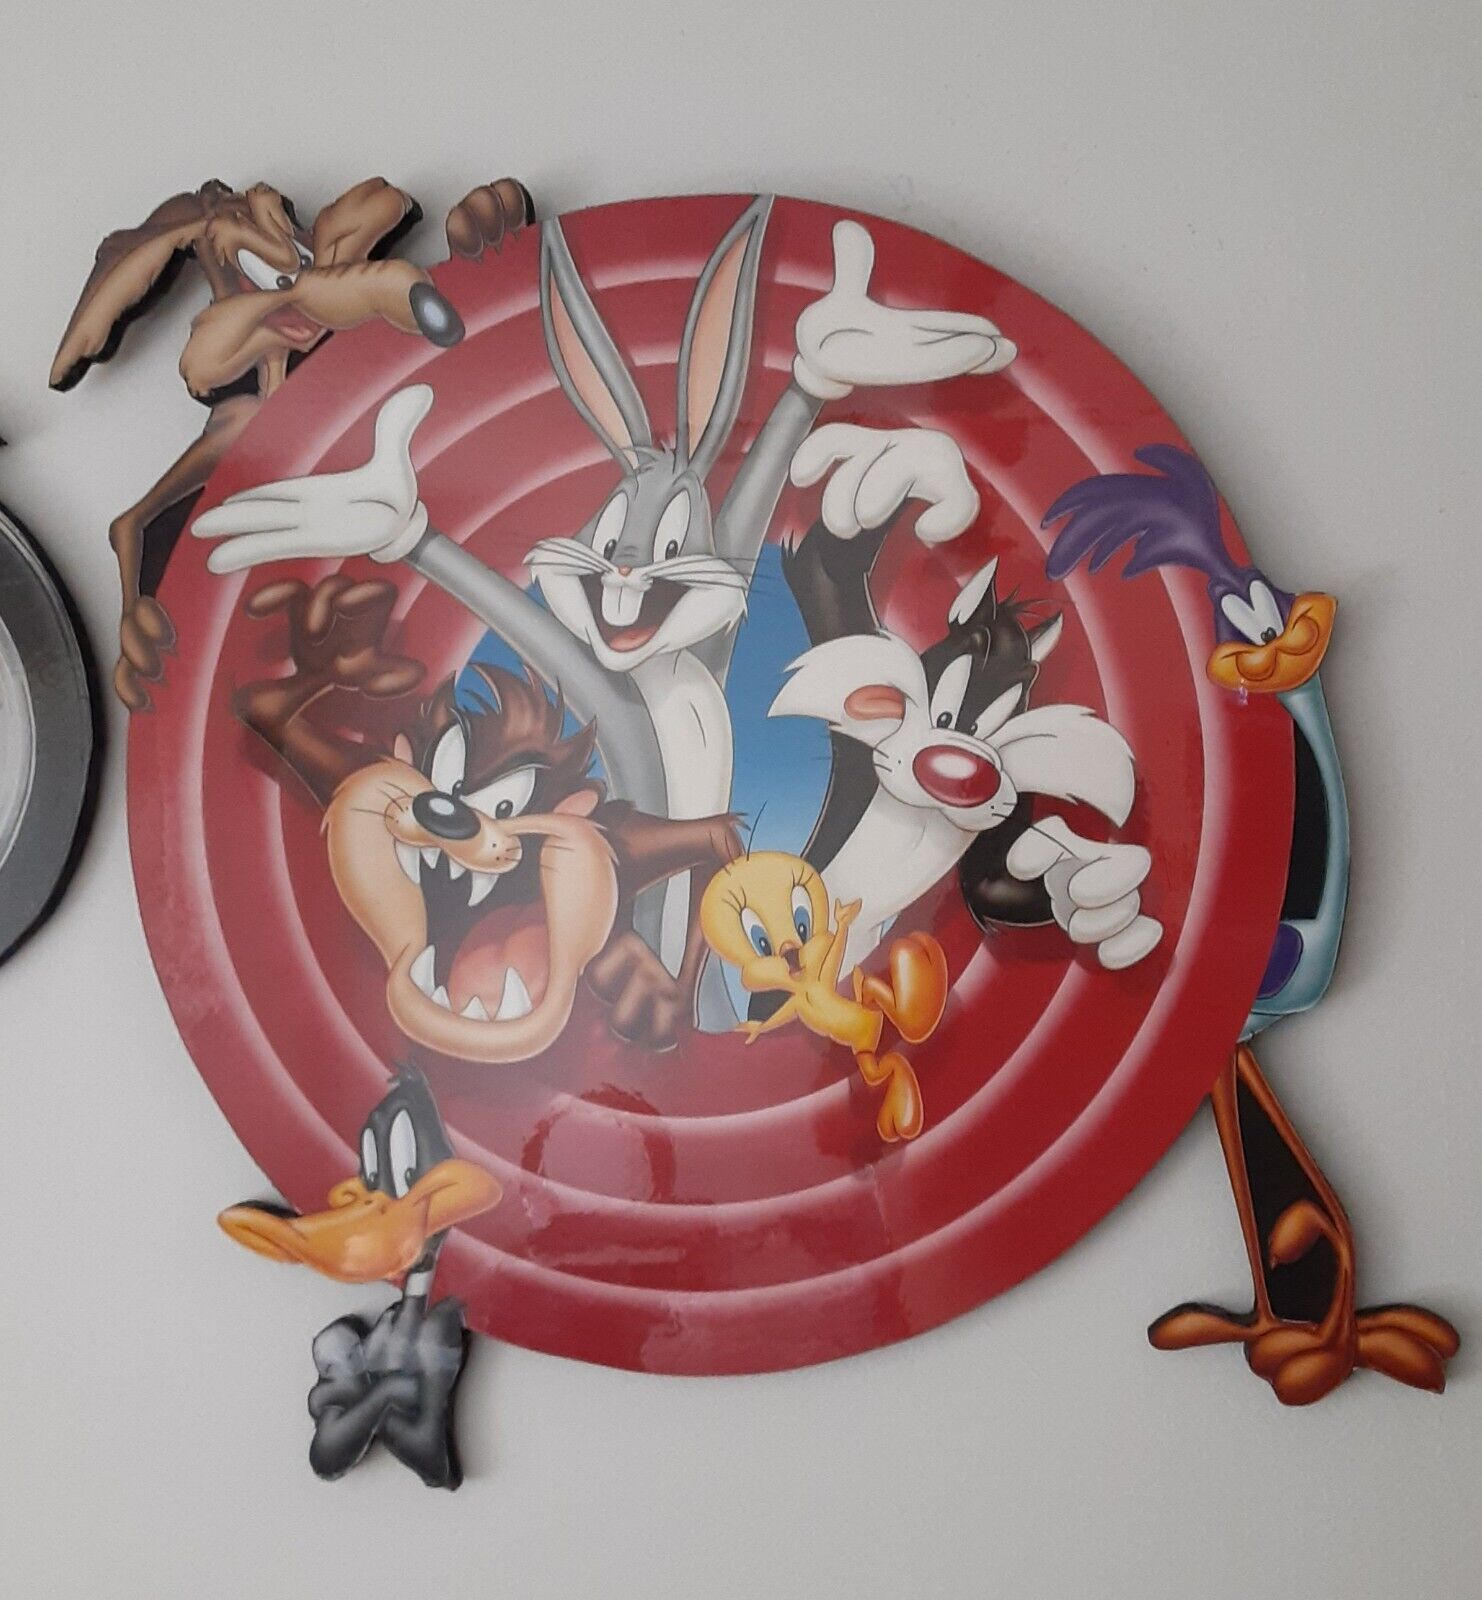 NEW Looney Tunes Crest Cut out Wall  Plaque Warner Bro Collectible